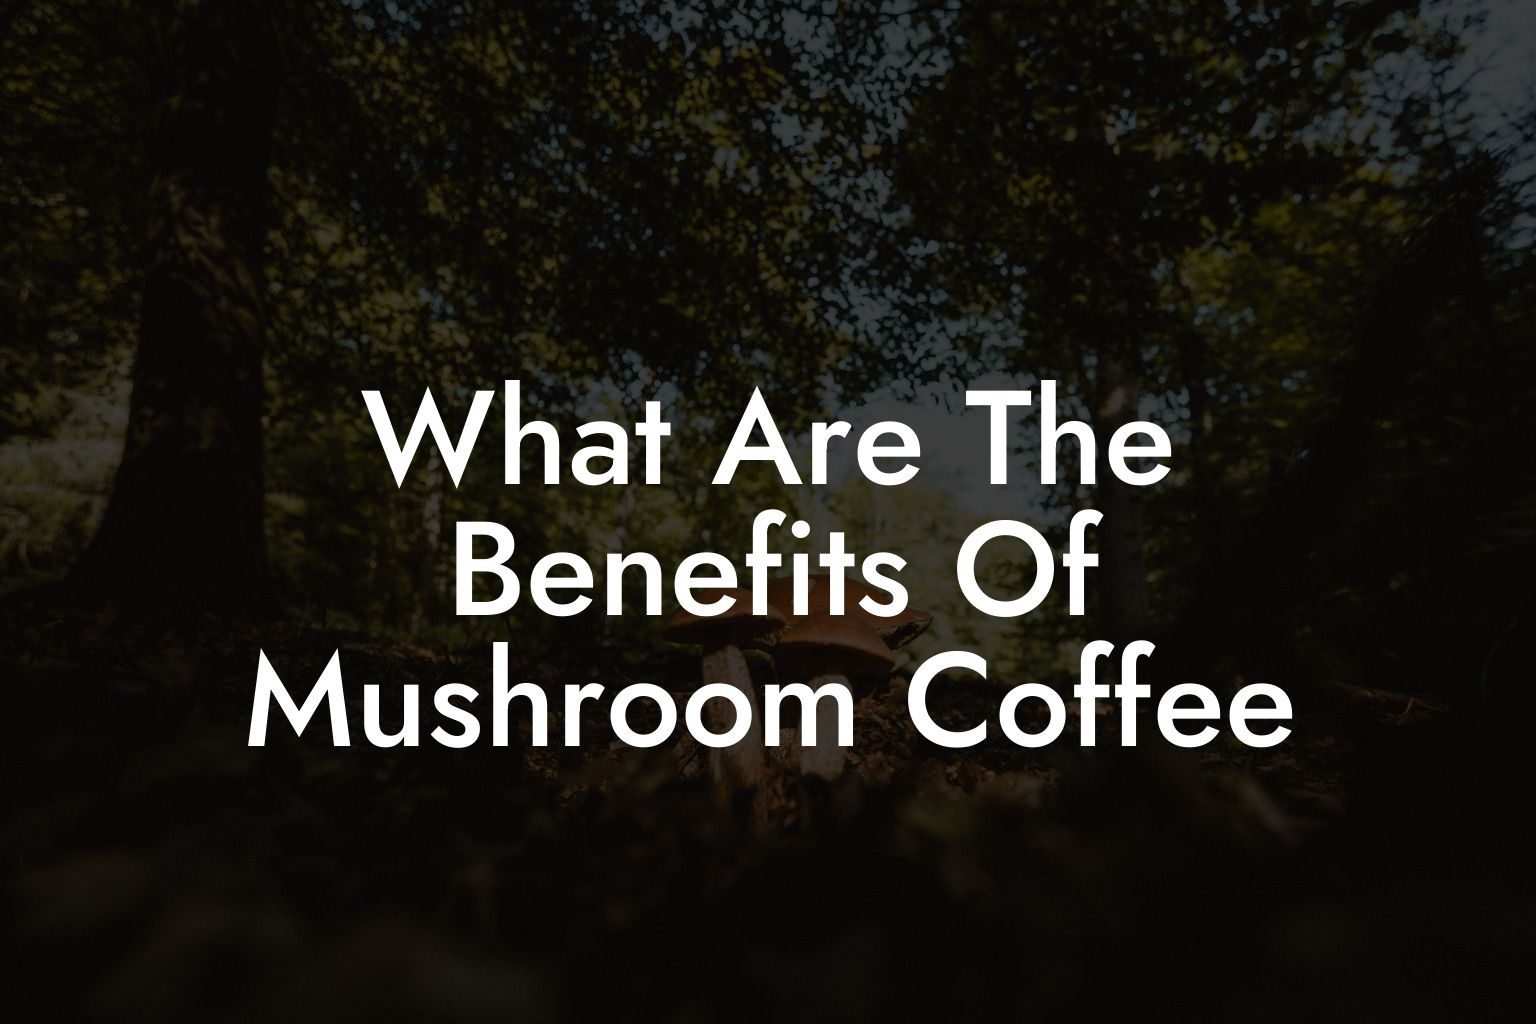 What Are The Benefits Of Mushroom Coffee